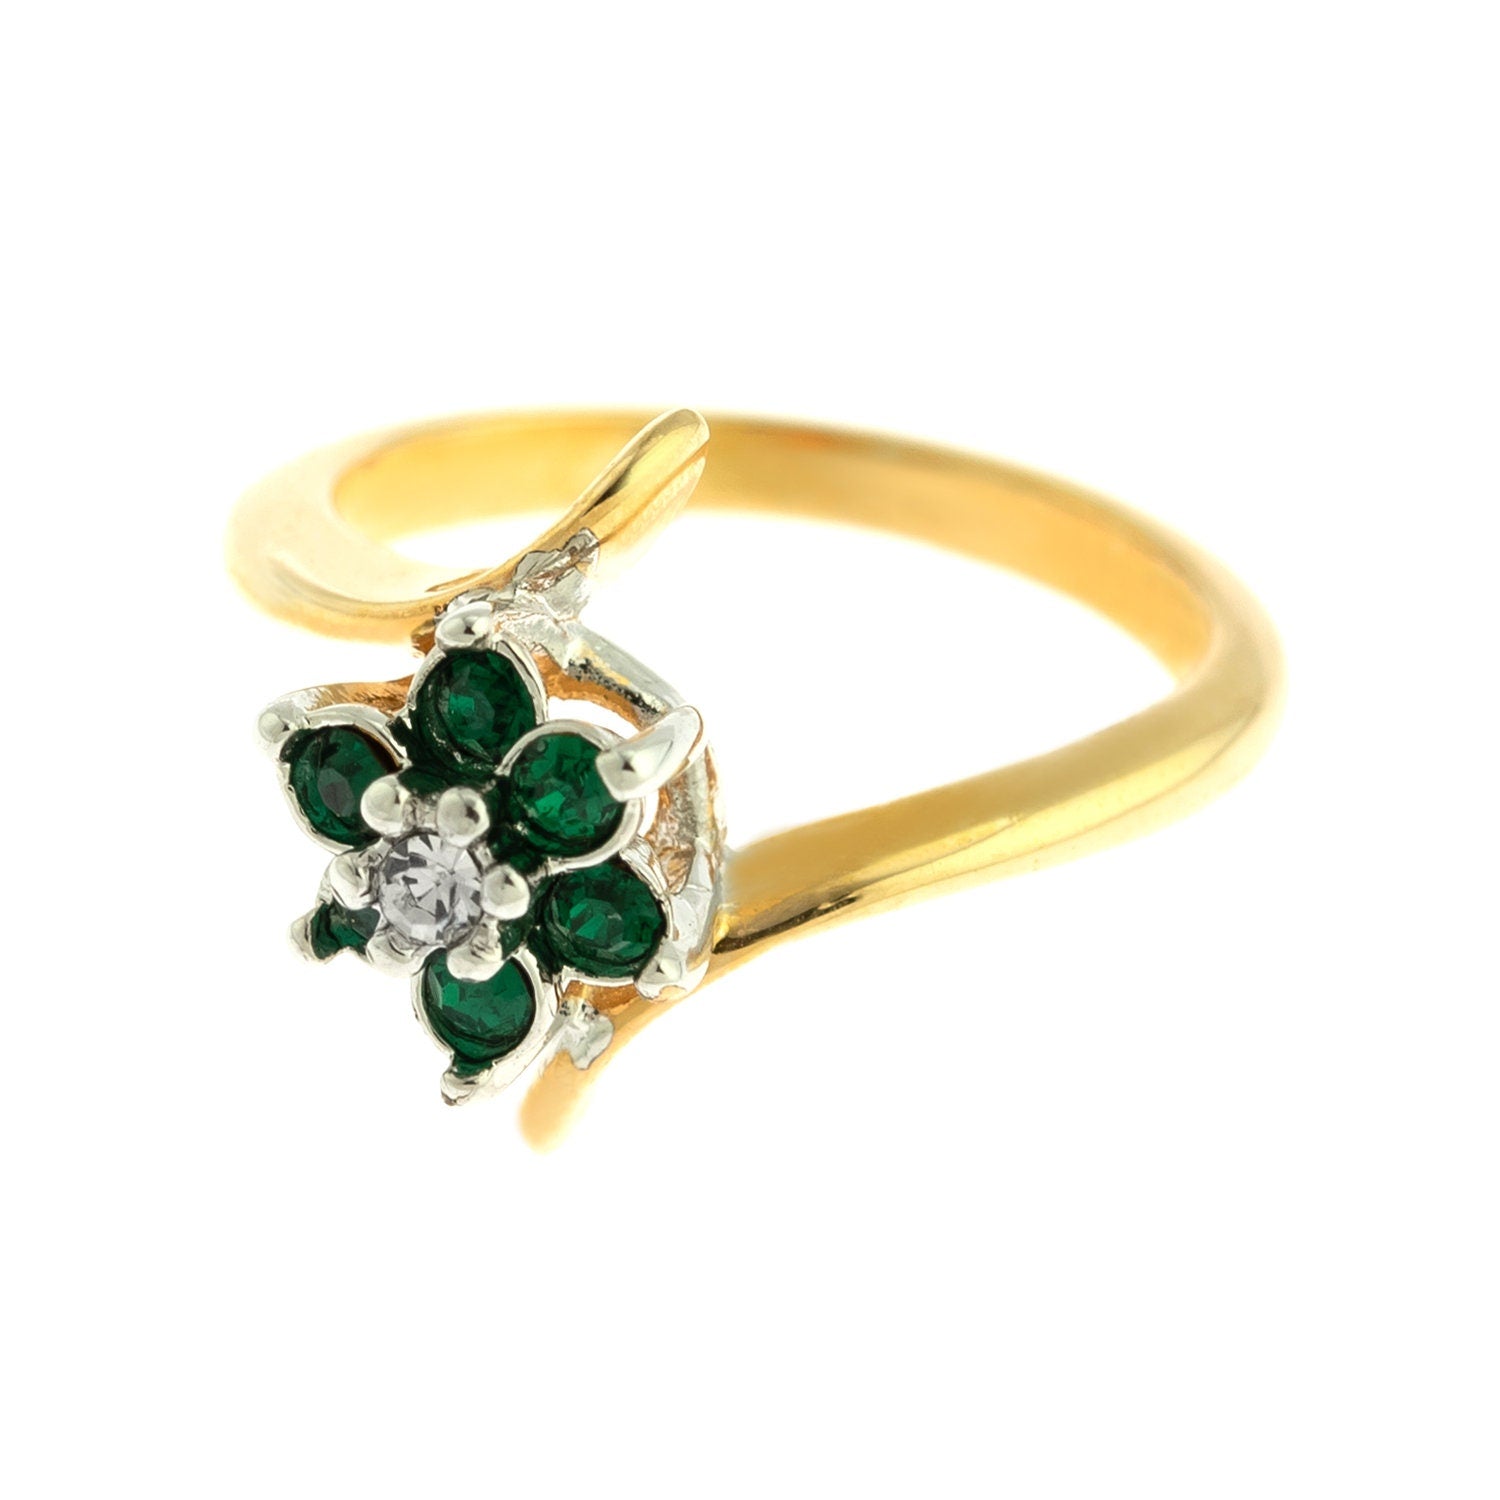 A Vintage Ring 1970's Emerald and Swarovski Crystal Ring 18kt Gold Flower Ring Jewelry Handmade for Women R842 - Limited Stock - Never Worn